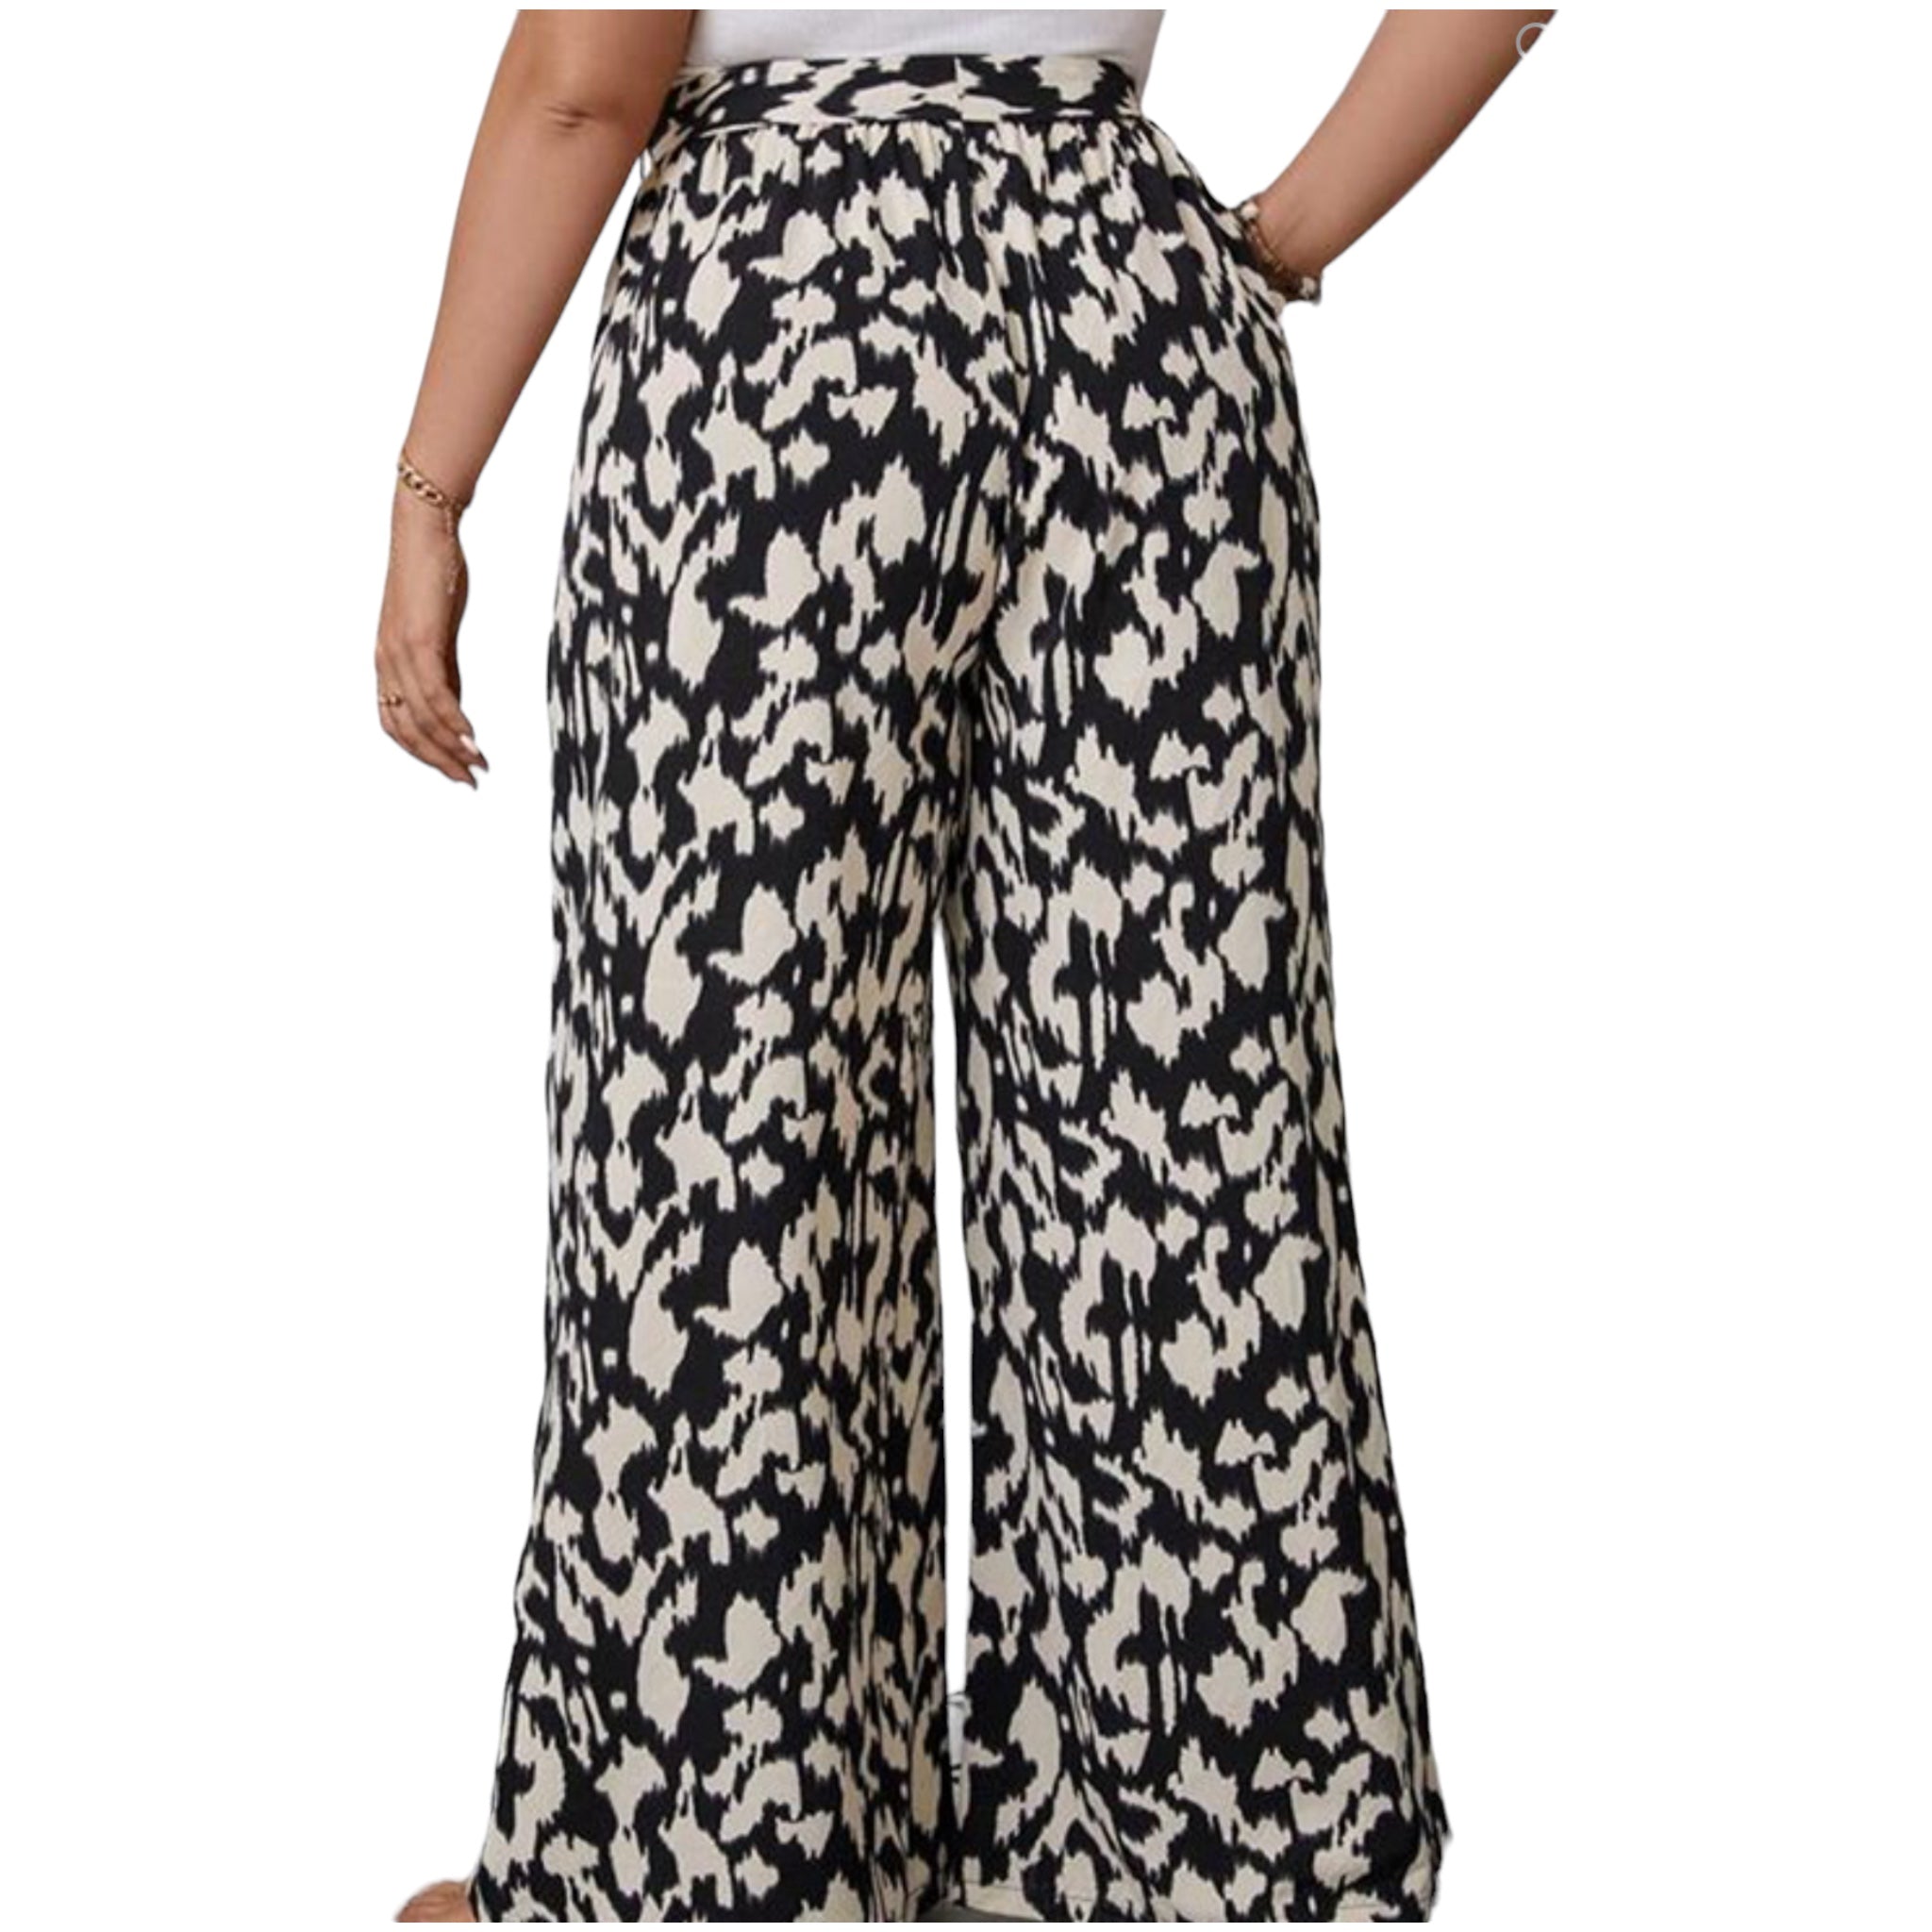 Womens Plus Black and White Wide Leg Belt Pant - Fabulously Dressed Boutique 